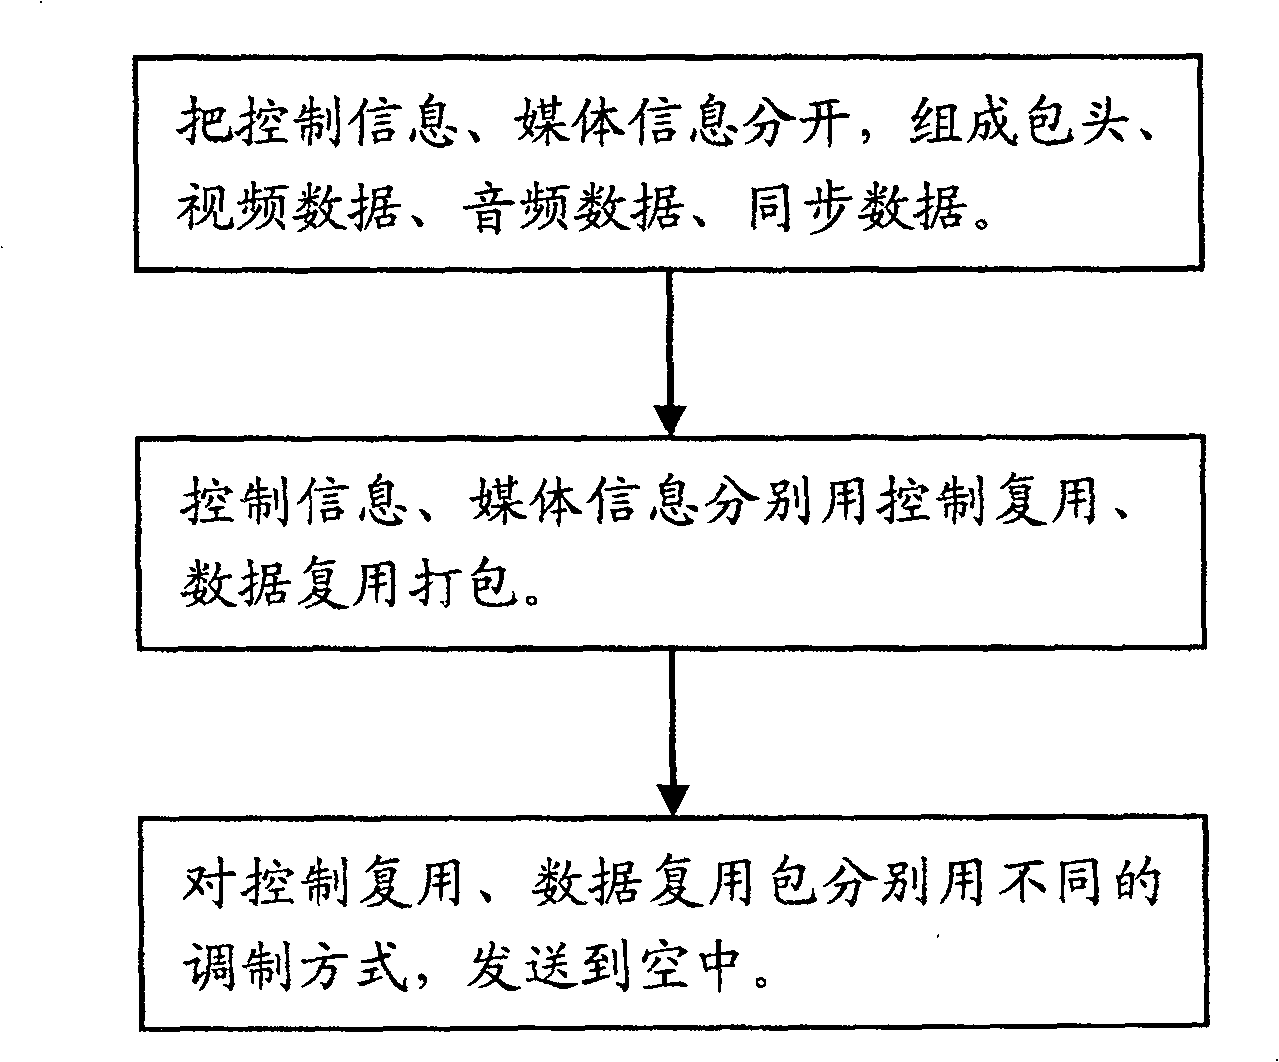 Method for differentiating transmissions of control information and media information in mobile multimedia broadcast